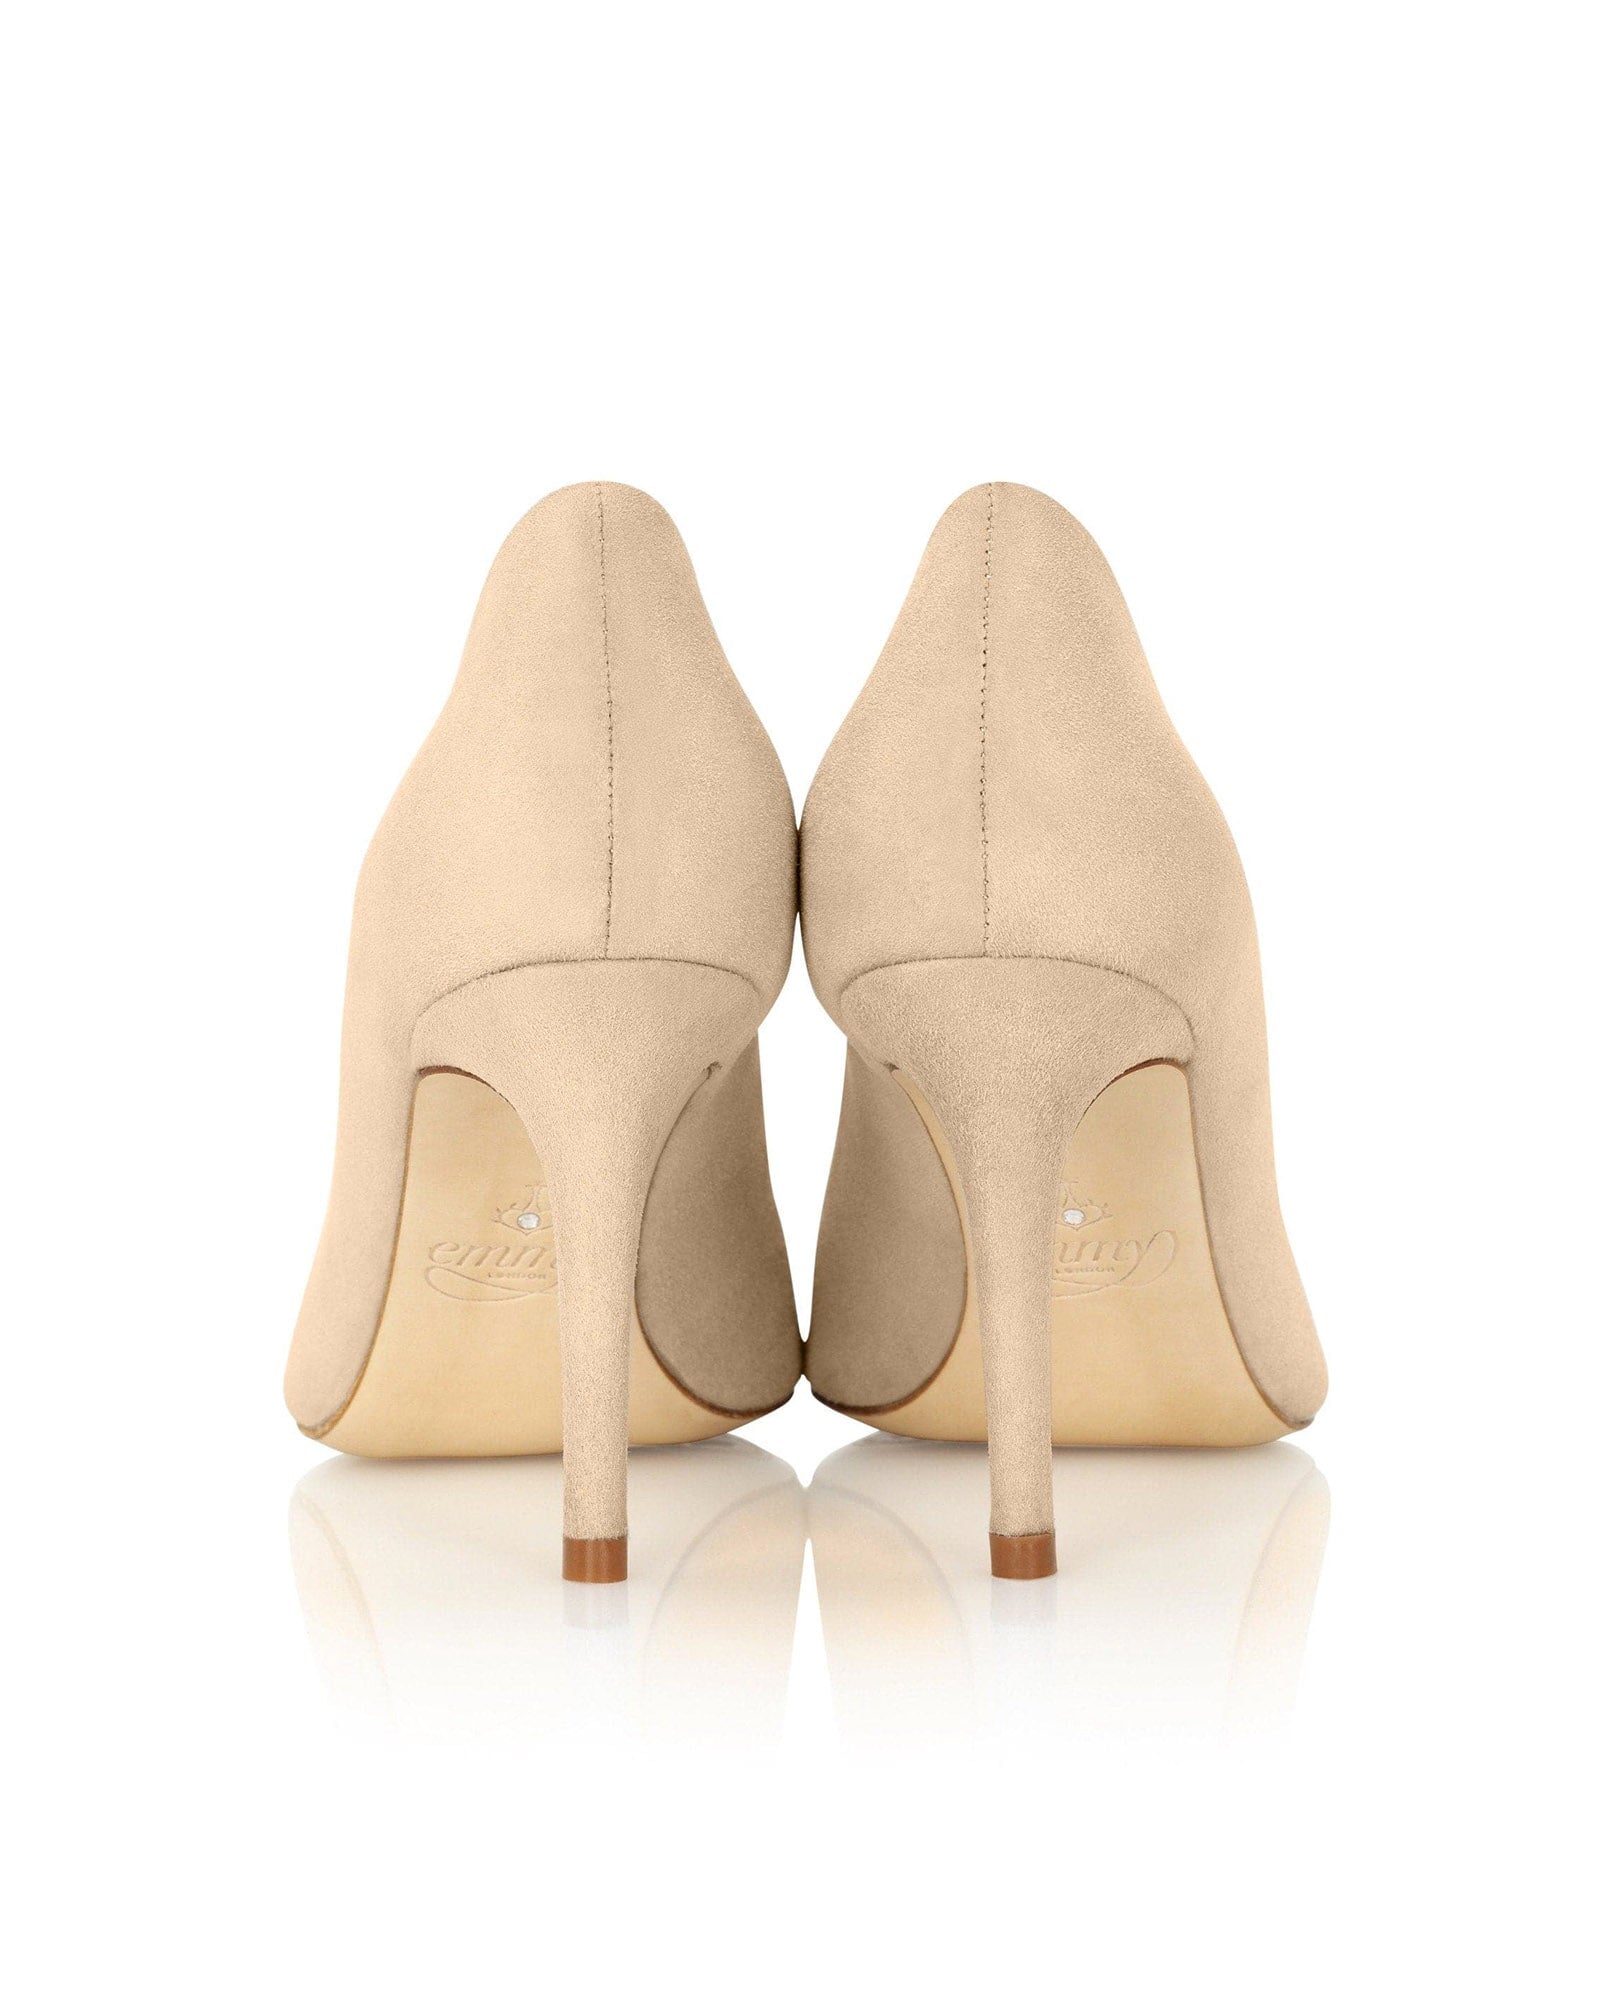 Claudia Biscuit Fashion Shoe Nude Suede Court Shoe  image